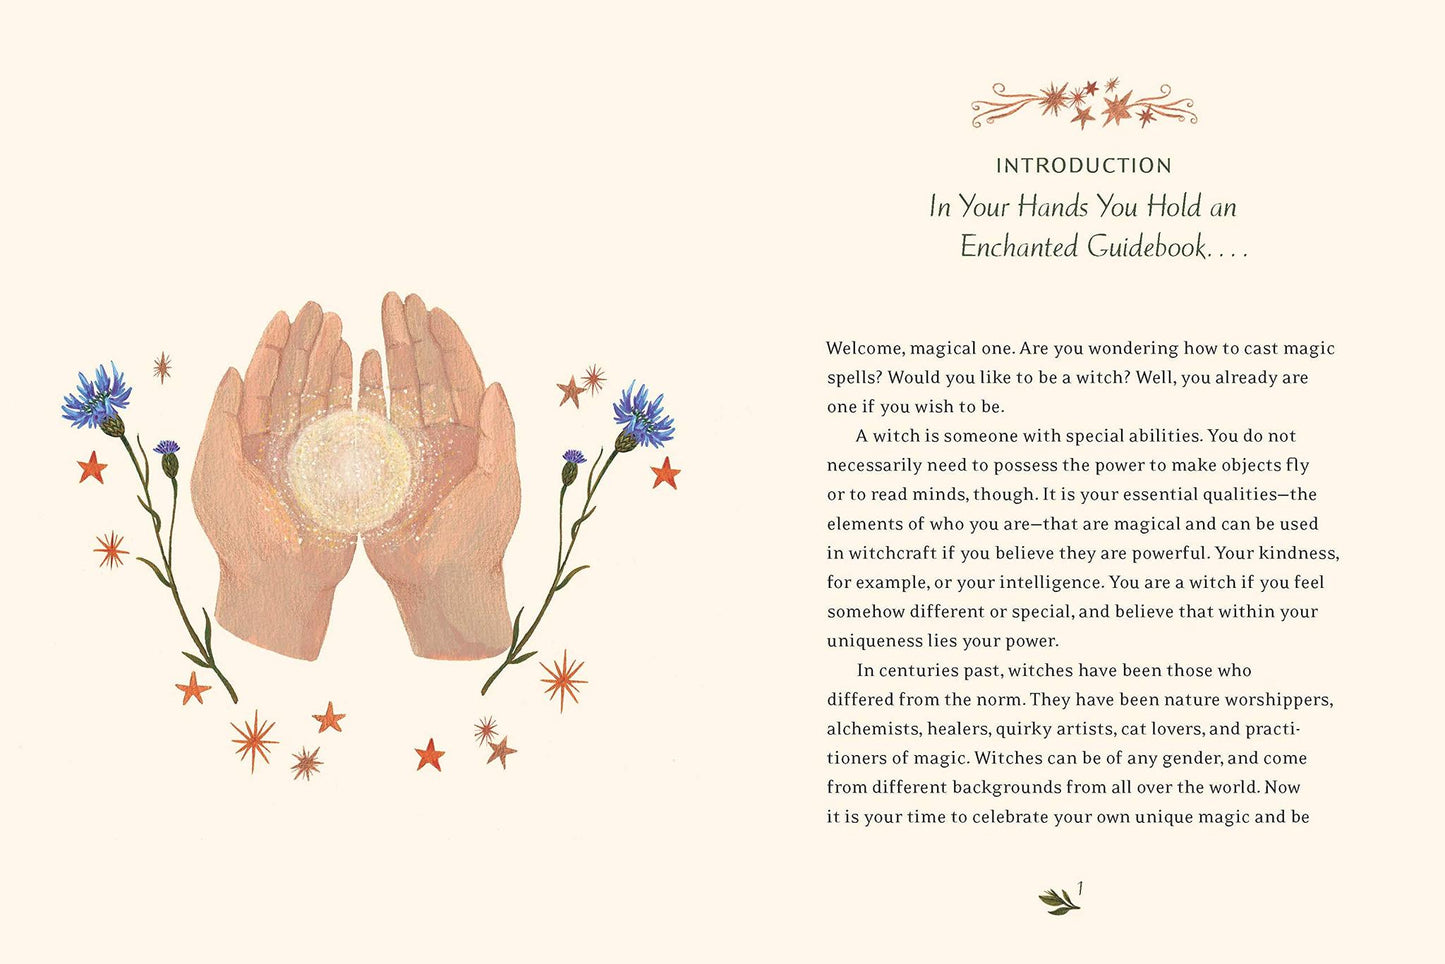 Introduction page from The Little Witch's Book of Spells by Ariel Kusby.